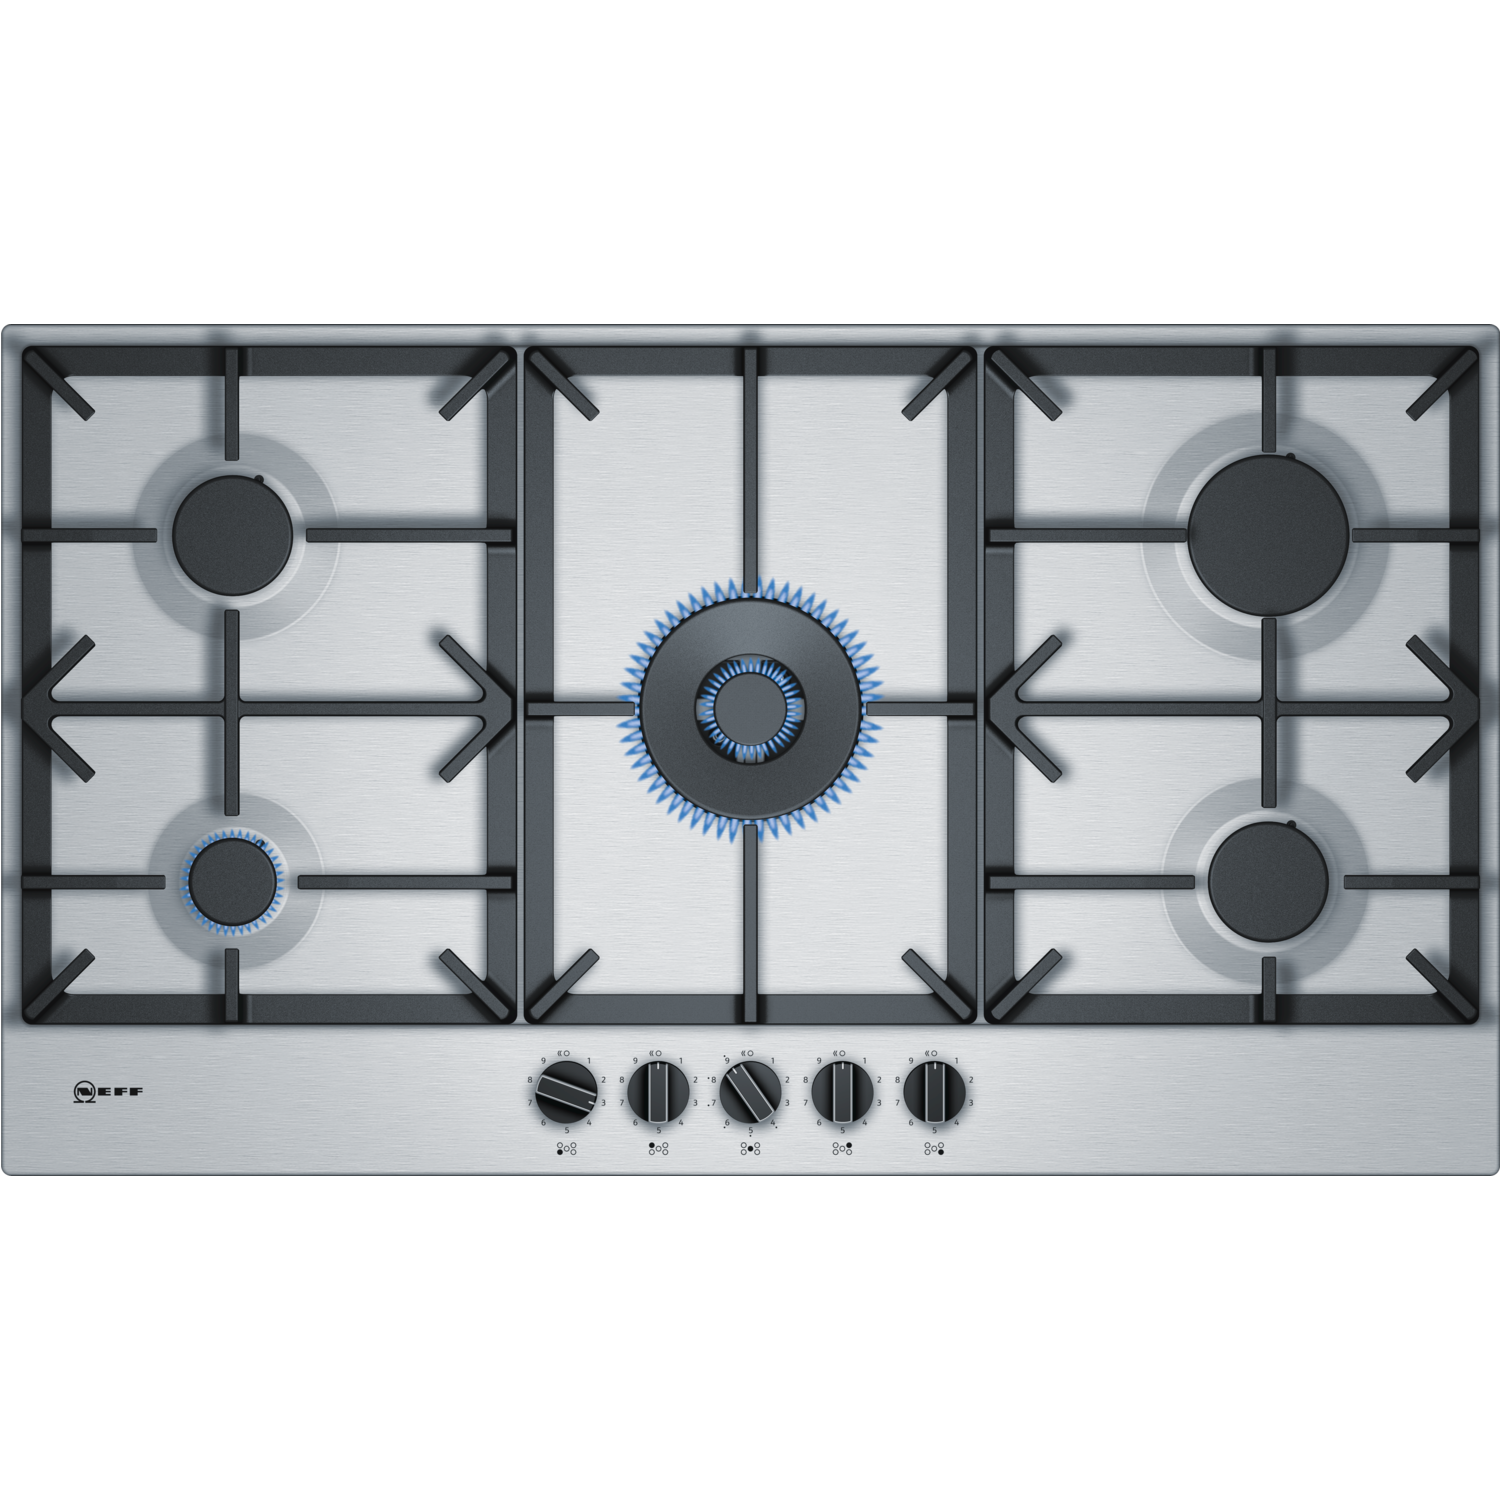 Refurbished Neff T29DS69N0 90cm 5 Burner Gas Hob Stainless Steel With Cast Iron Pan Stands